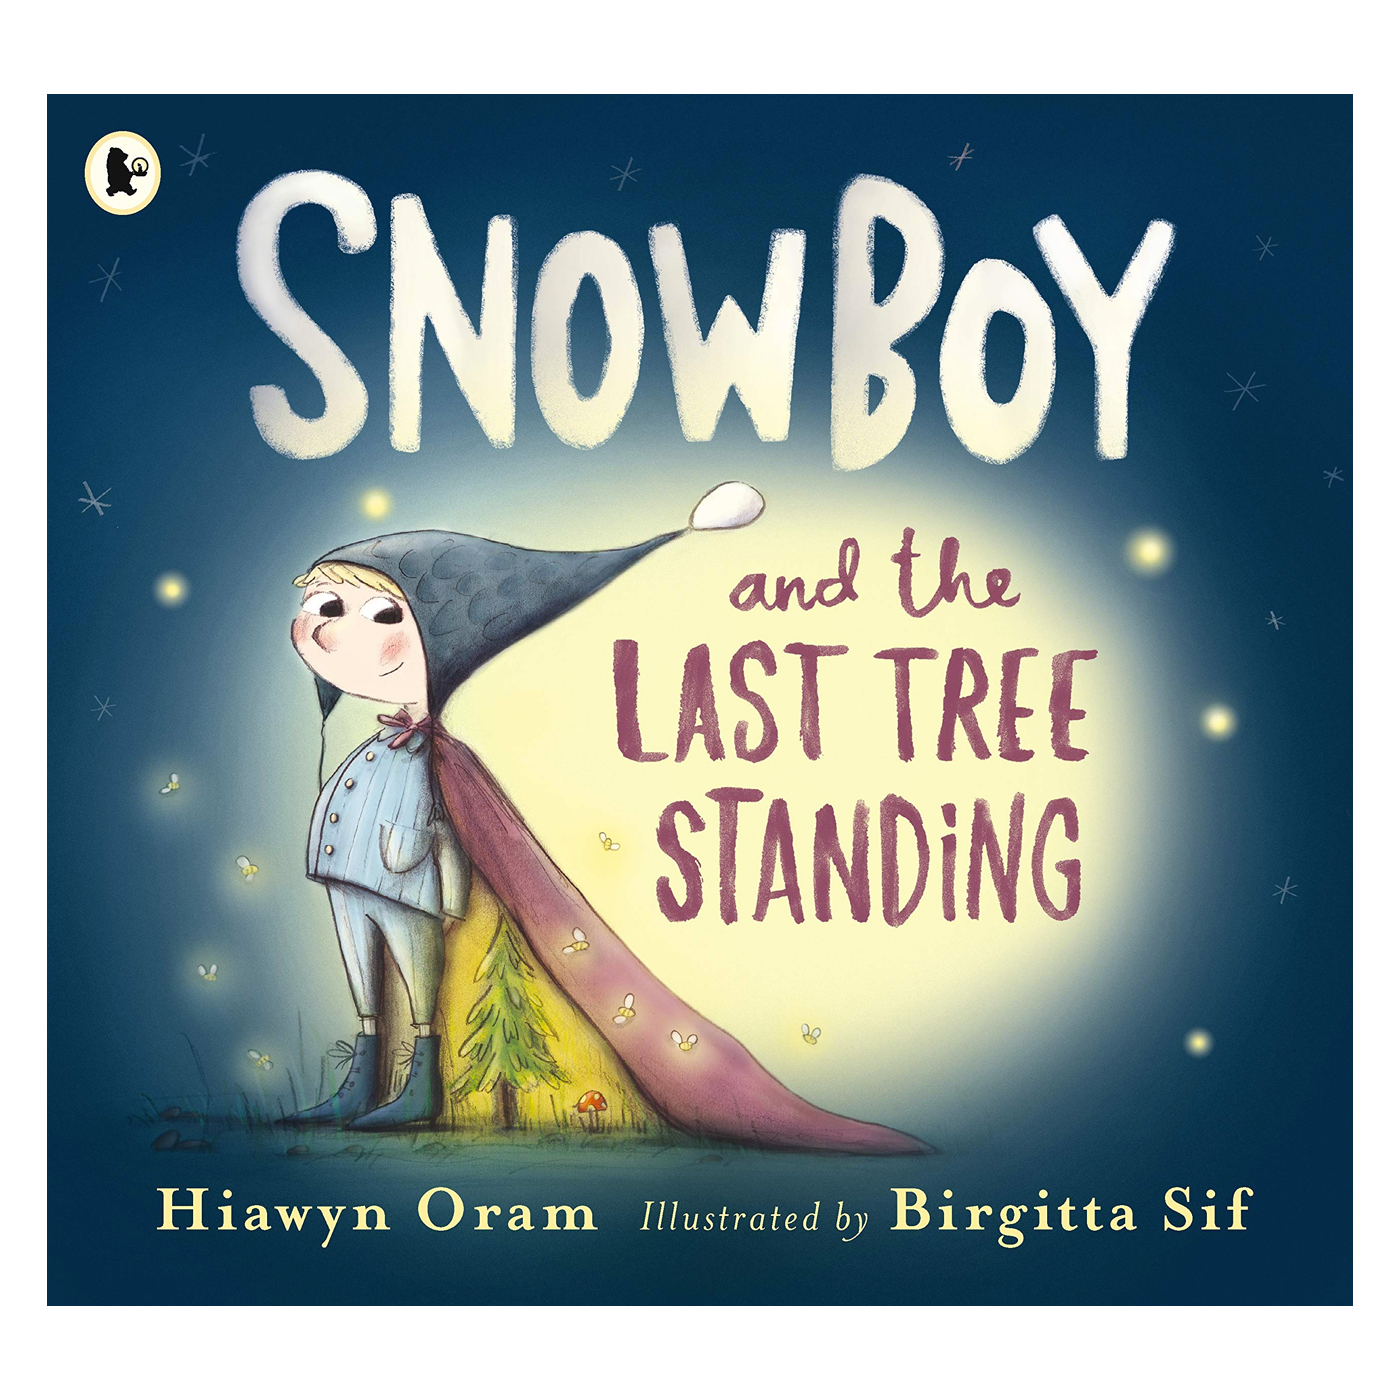  Snowboy and the Last Tree Standing